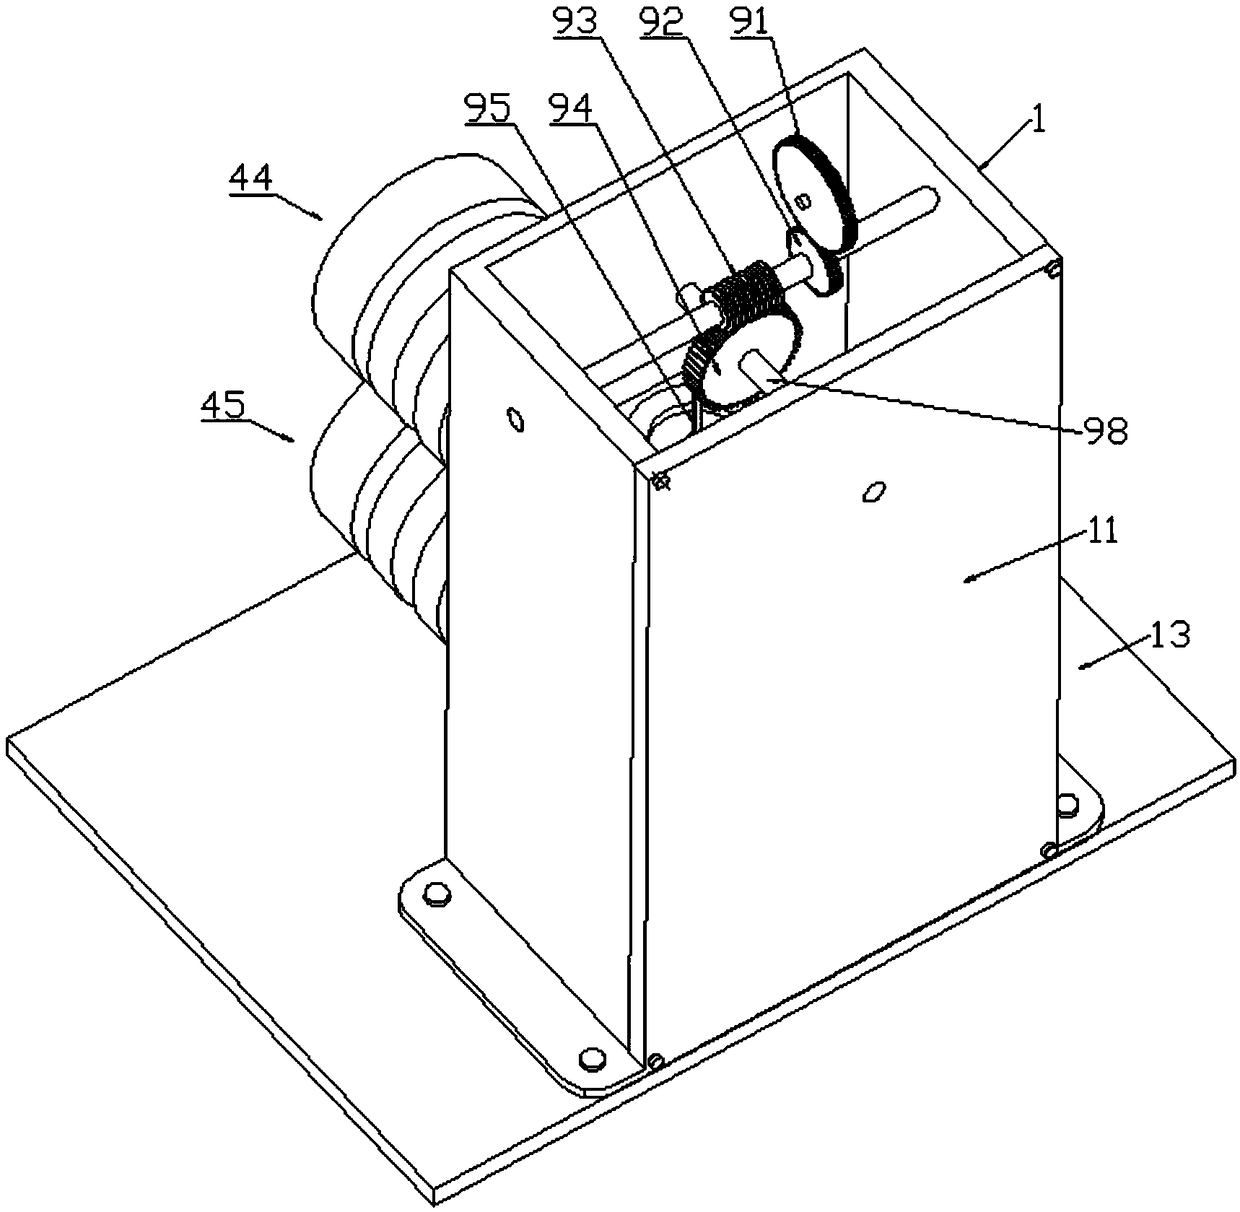 Guiding device for crimp connection of automobile wire harnesses